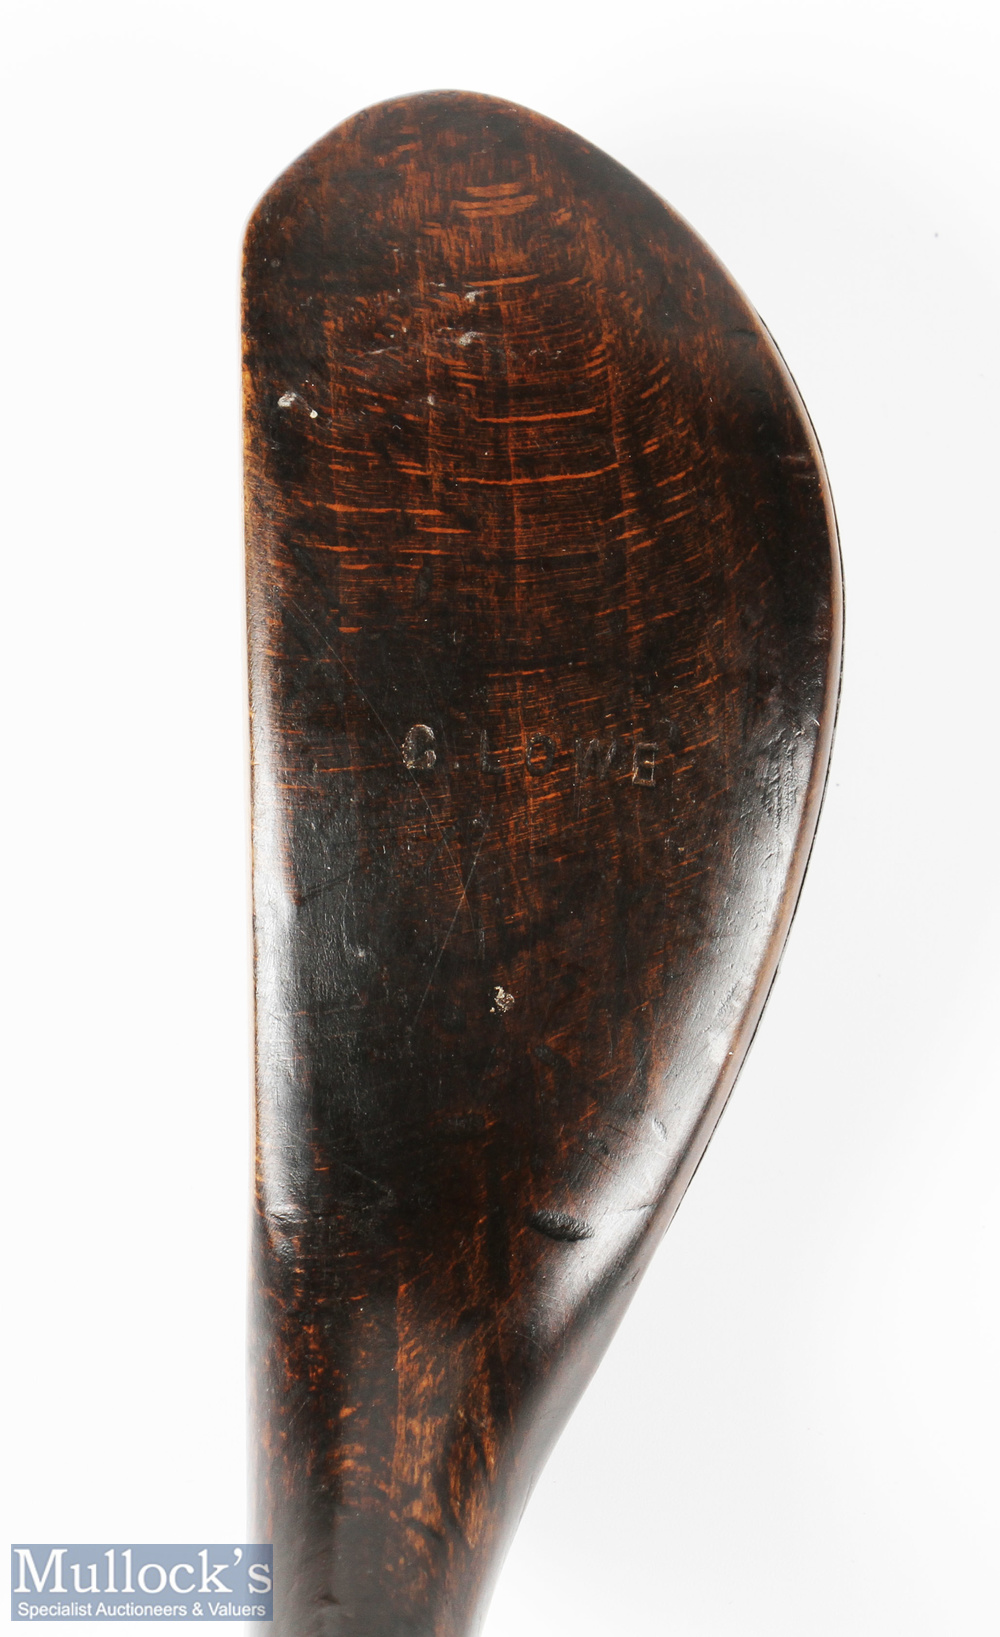 G Lowe Royal Lytham and St Annes longnose dark stained beech wood play club c1888 - overall 43. - Image 4 of 5